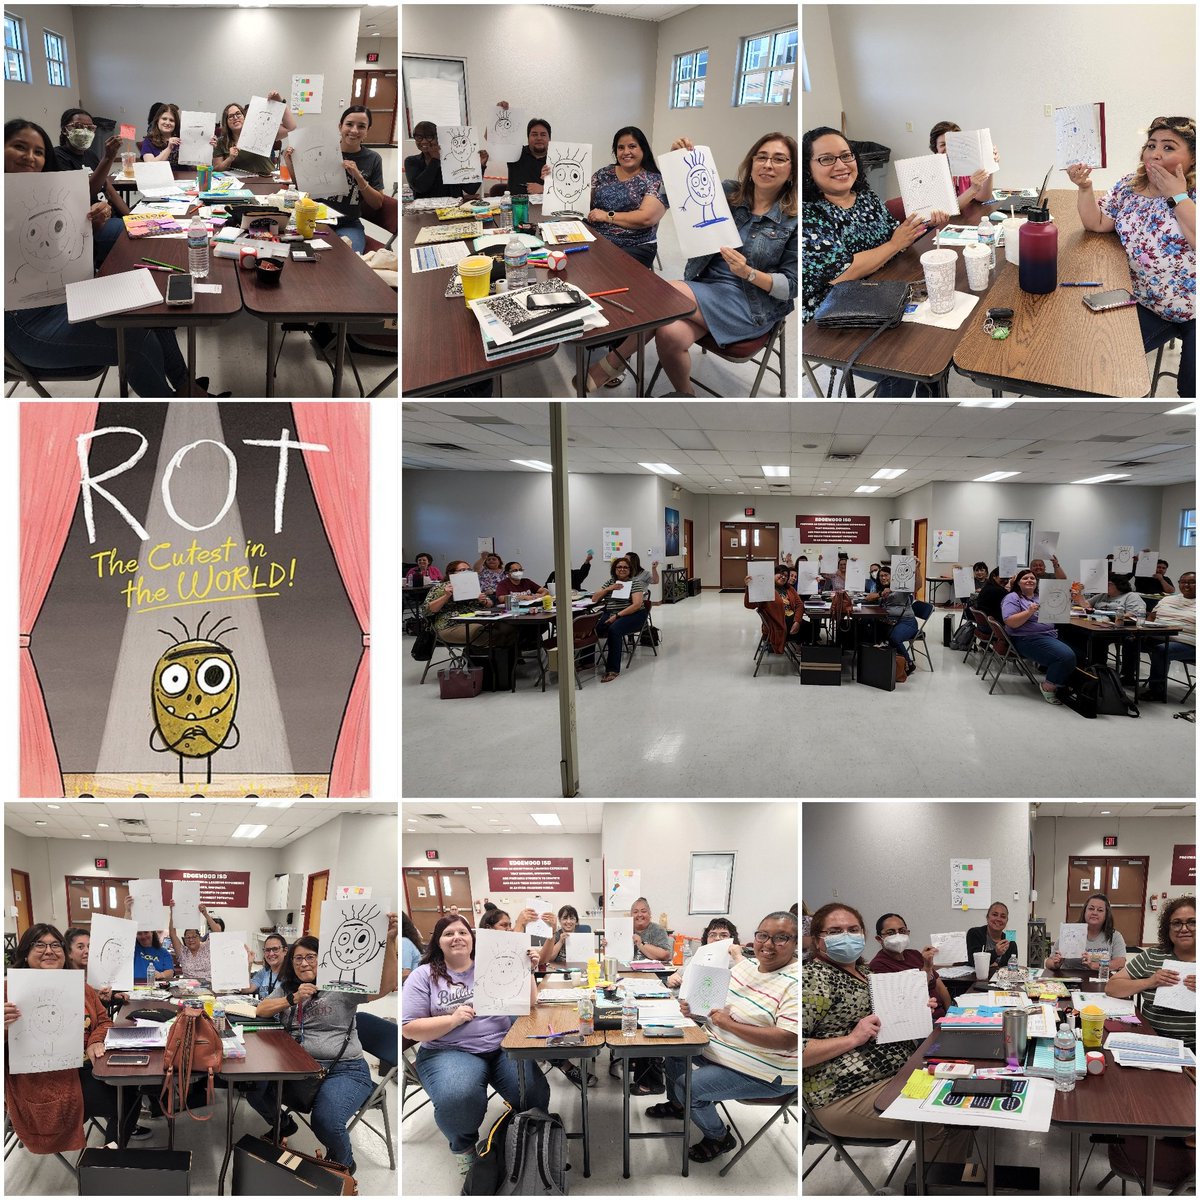 @EISDofSA teachers are The Cutest in the WORLD! Comprehension Day with #PDwithDrGG! Another great turnout! #EISDLiteracy @DrH_OnTheEdge @teri_silva @MarissaLiteracy